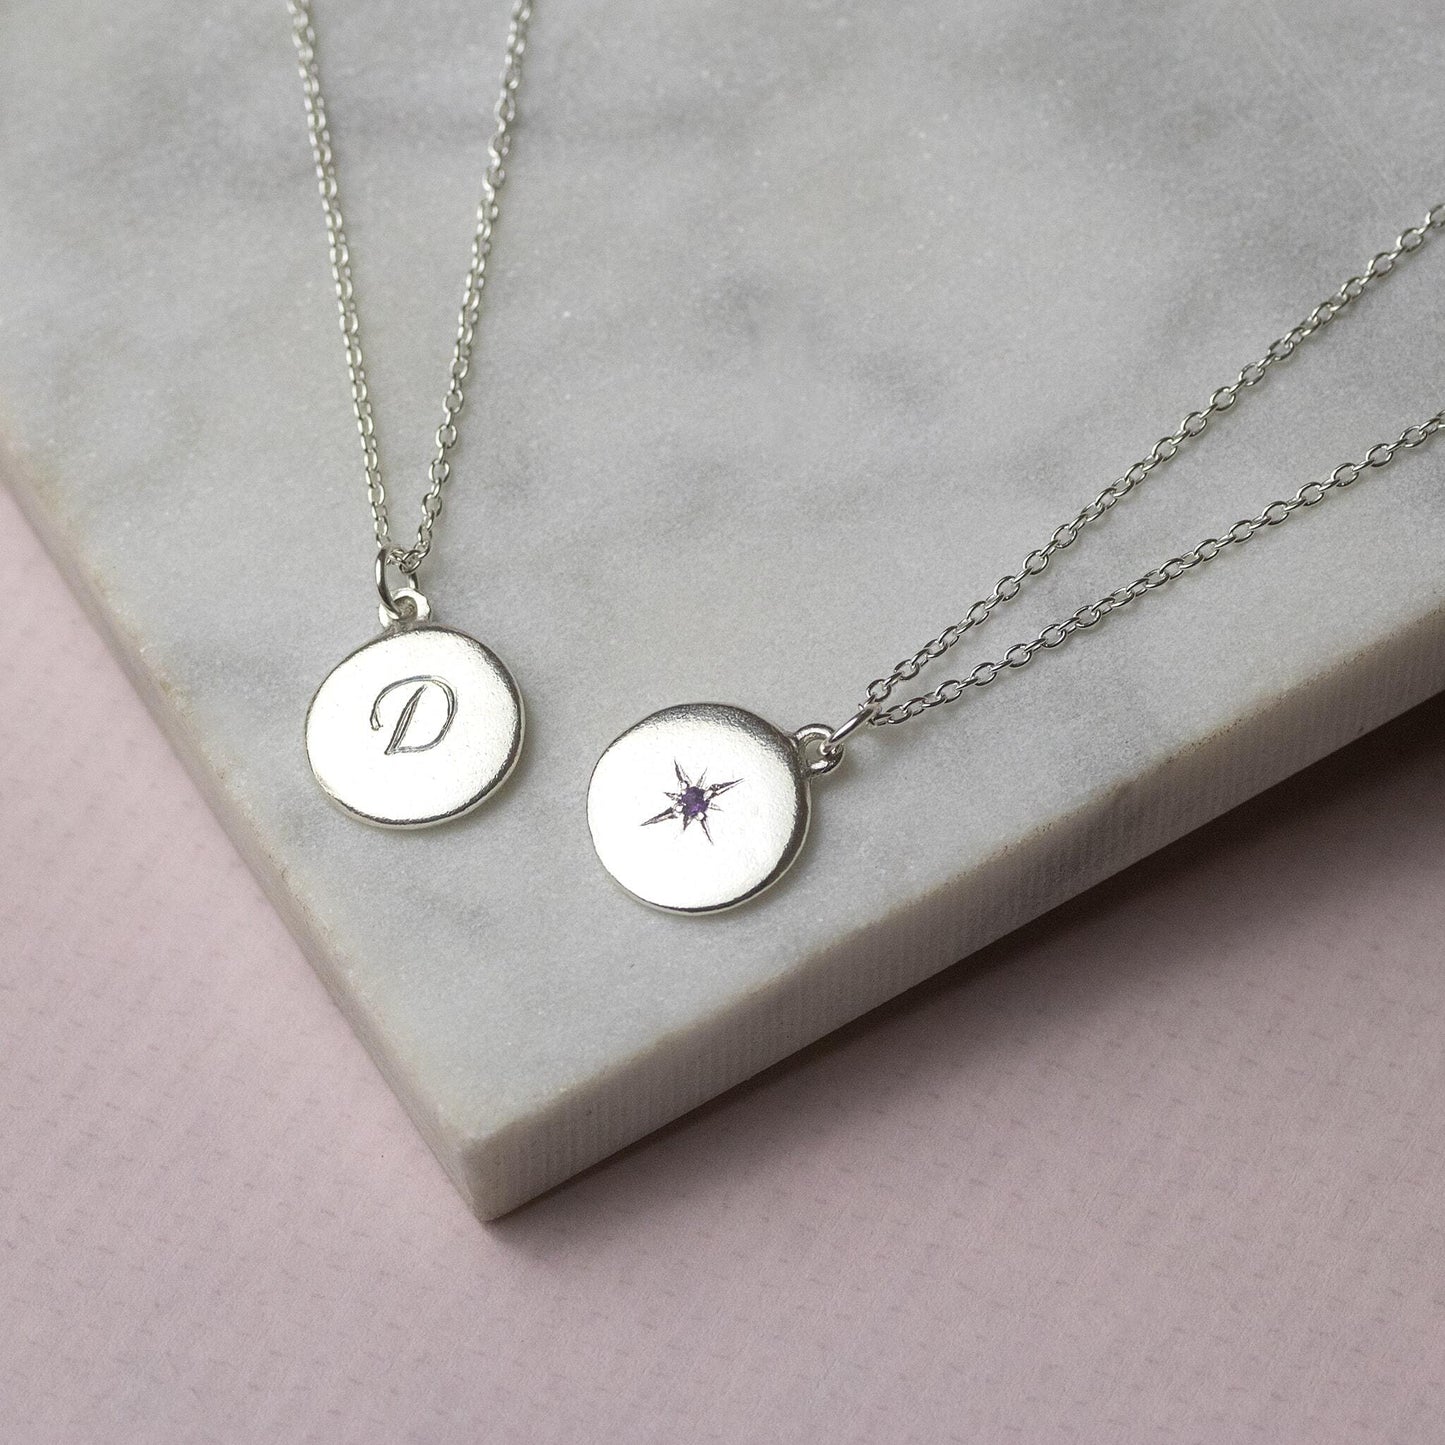 Guiding Star Necklace - Birthstone & Initial - Silver